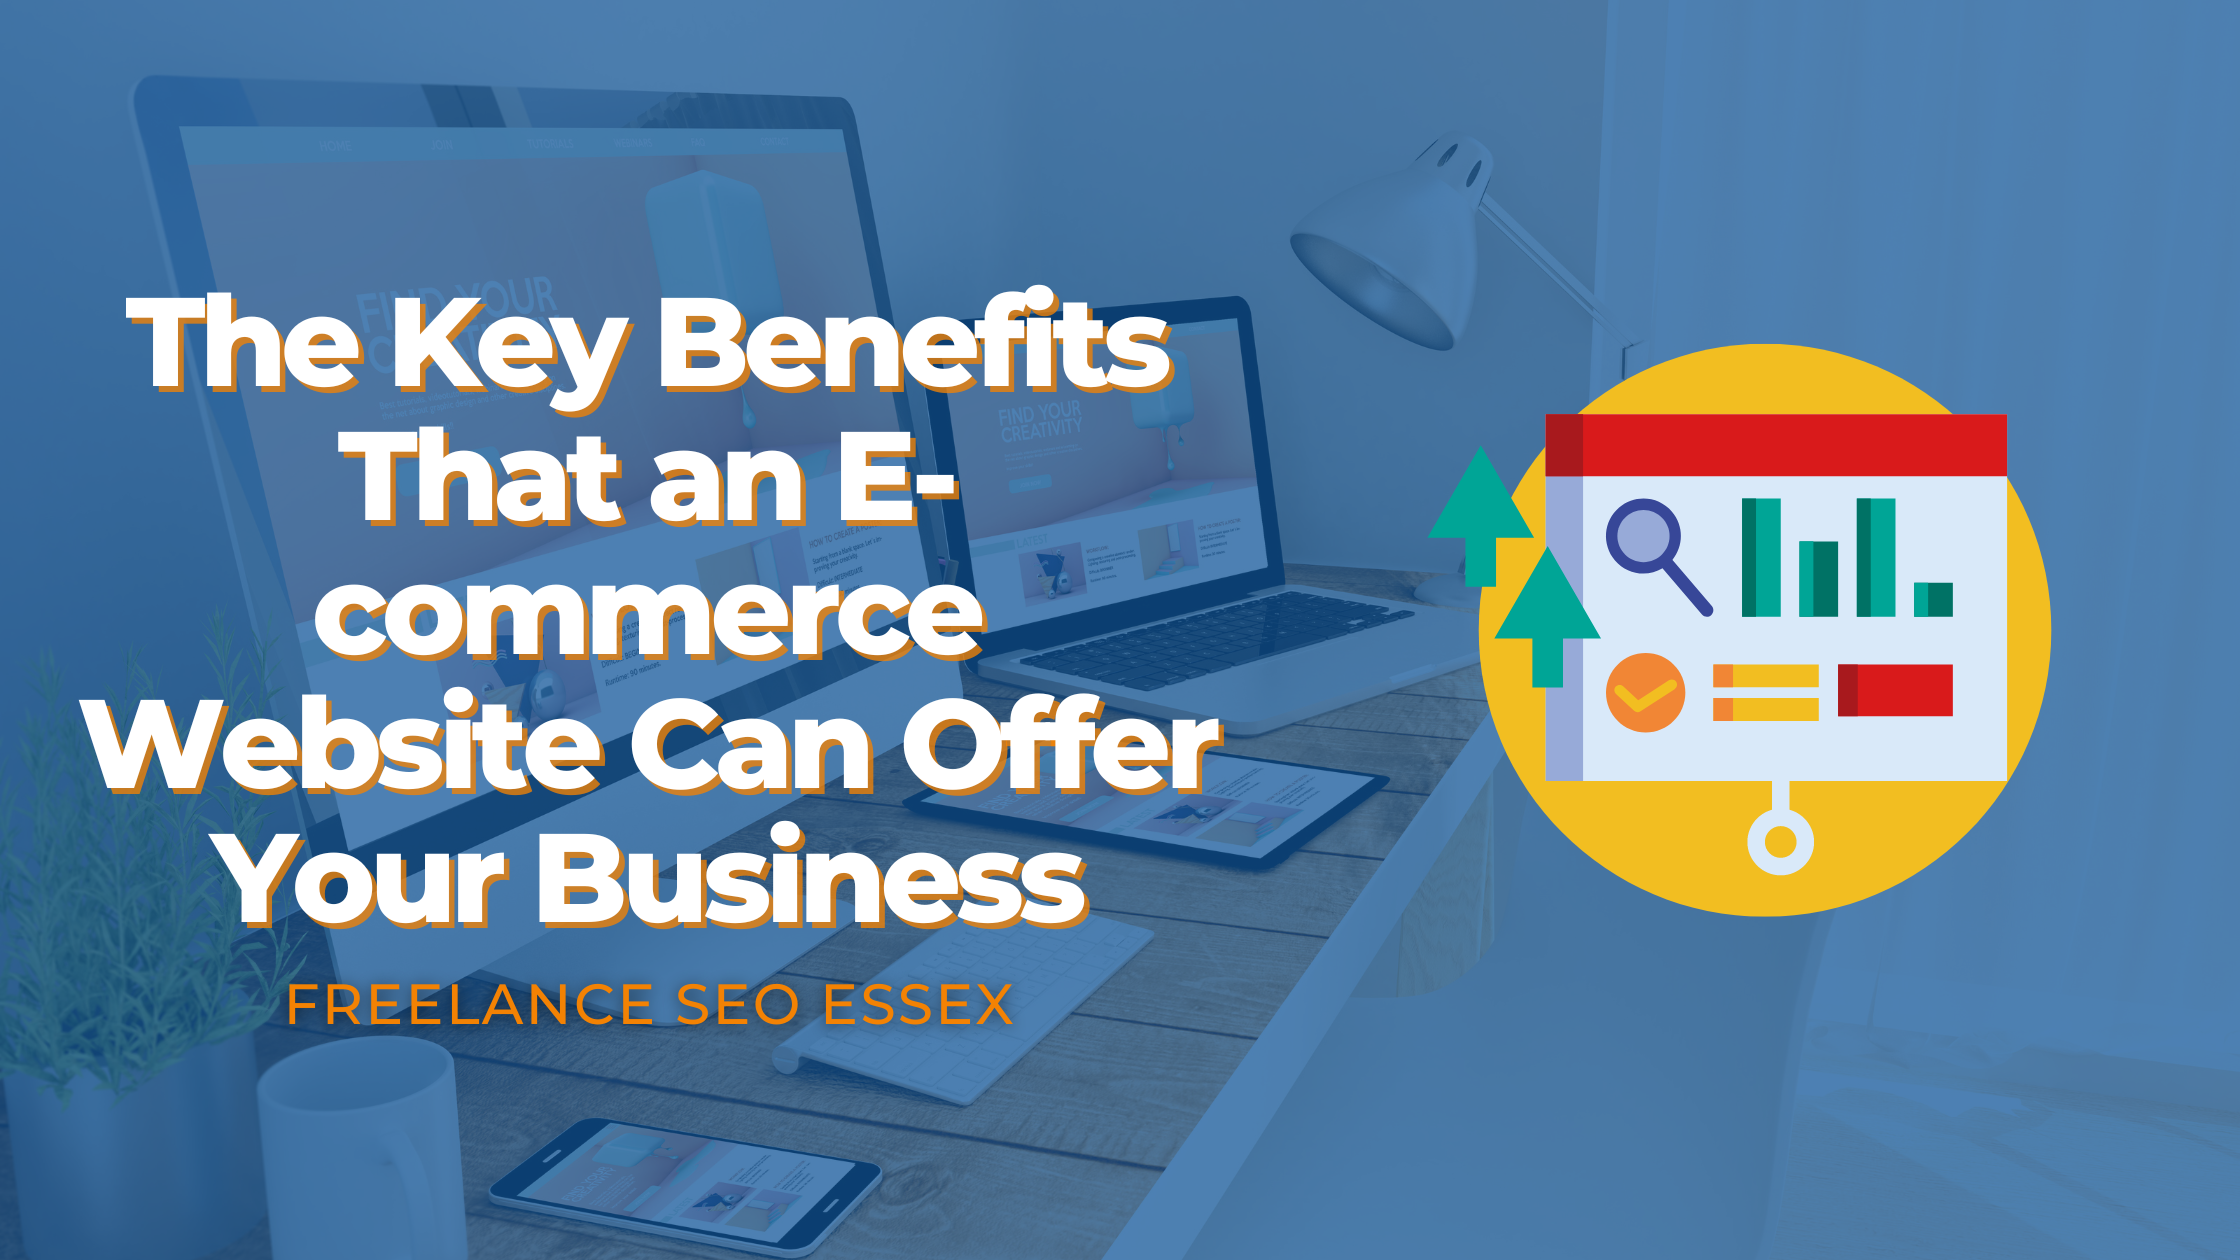 The Key Benefits That an E-commerce Website Can Offer Your Business - FREELANCE SEO ESSEX